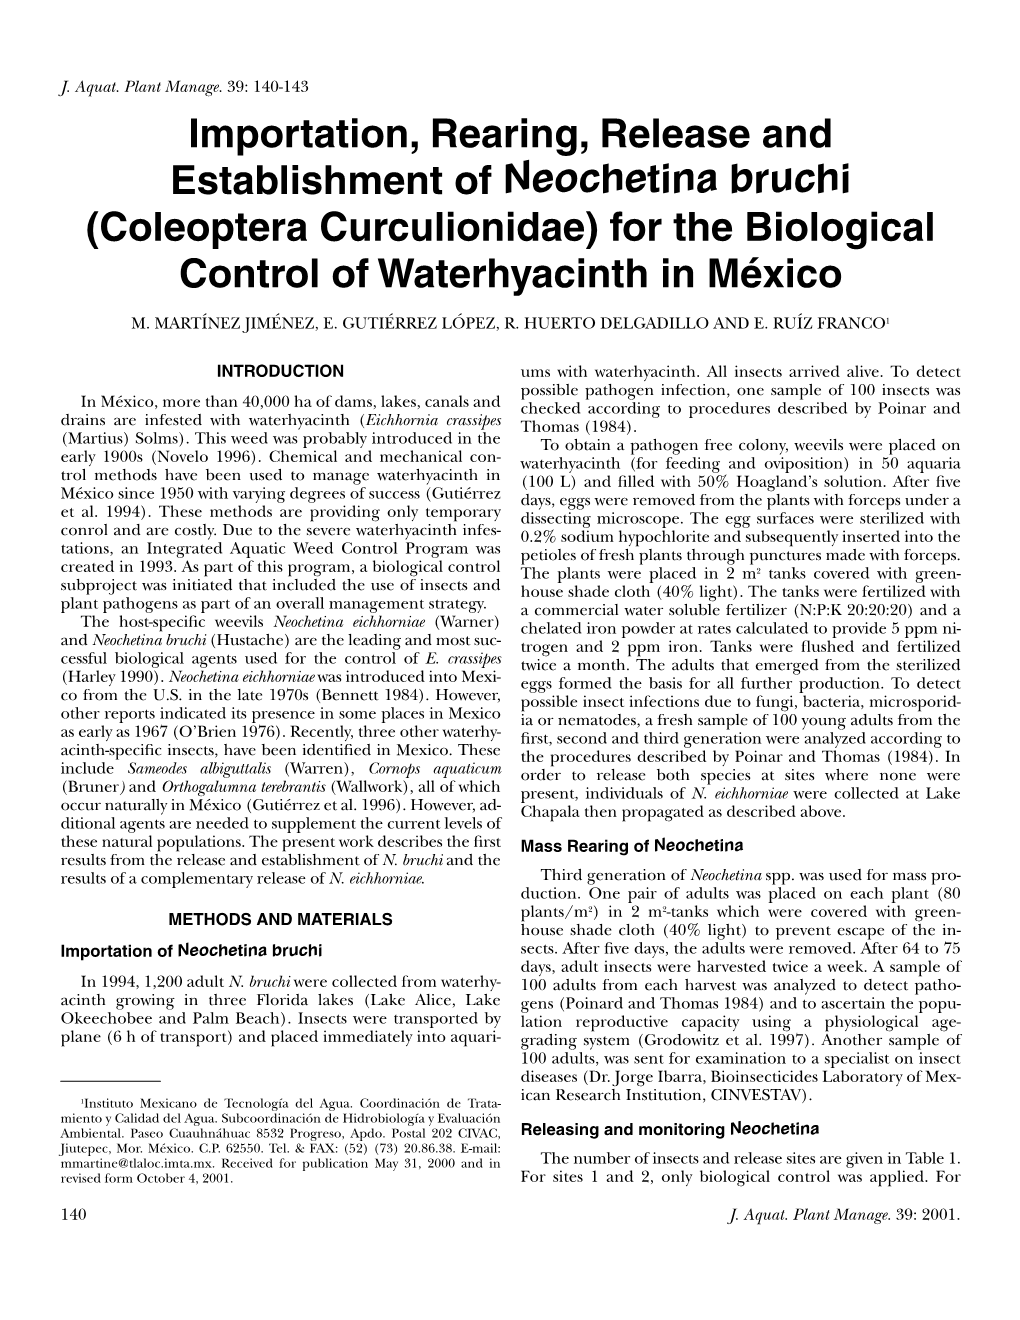 Importation, Rearing, Release and Establishment of Neochetina Bruchi (Coleoptera Curculionidae) for the Biological Control of Waterhyacinth in México